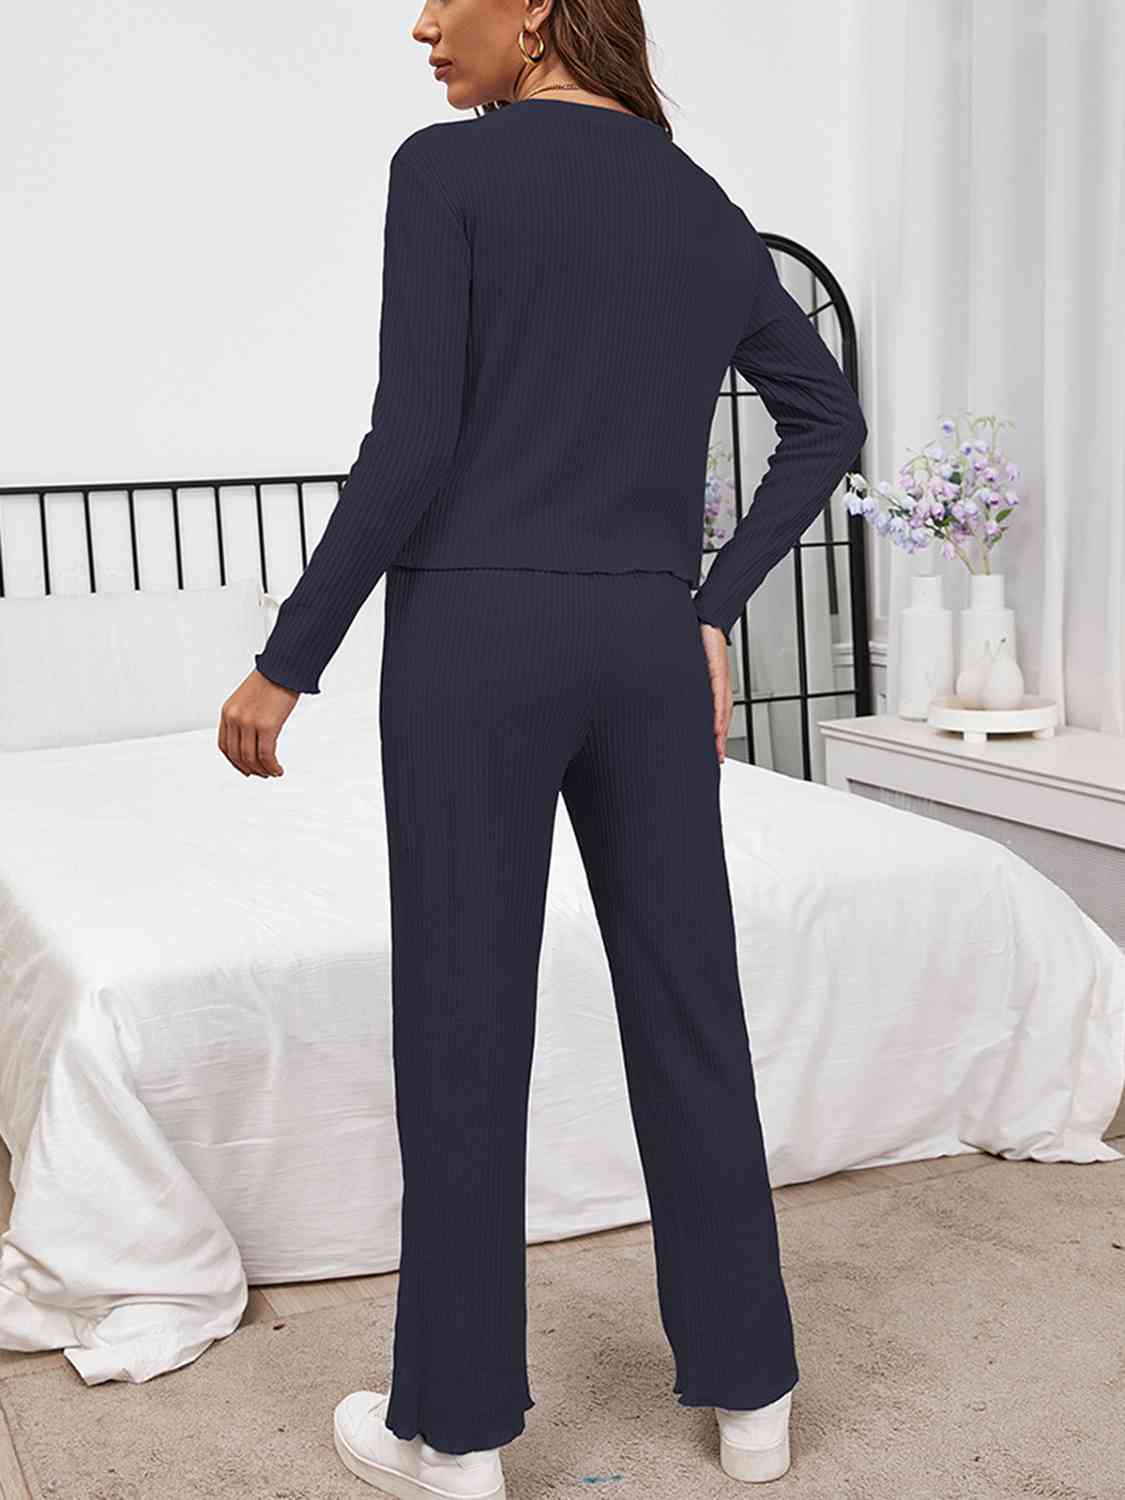 Round Neck Long Sleeve Top and Drawstring Pants Lounge Set - Fashion Girl Online Store